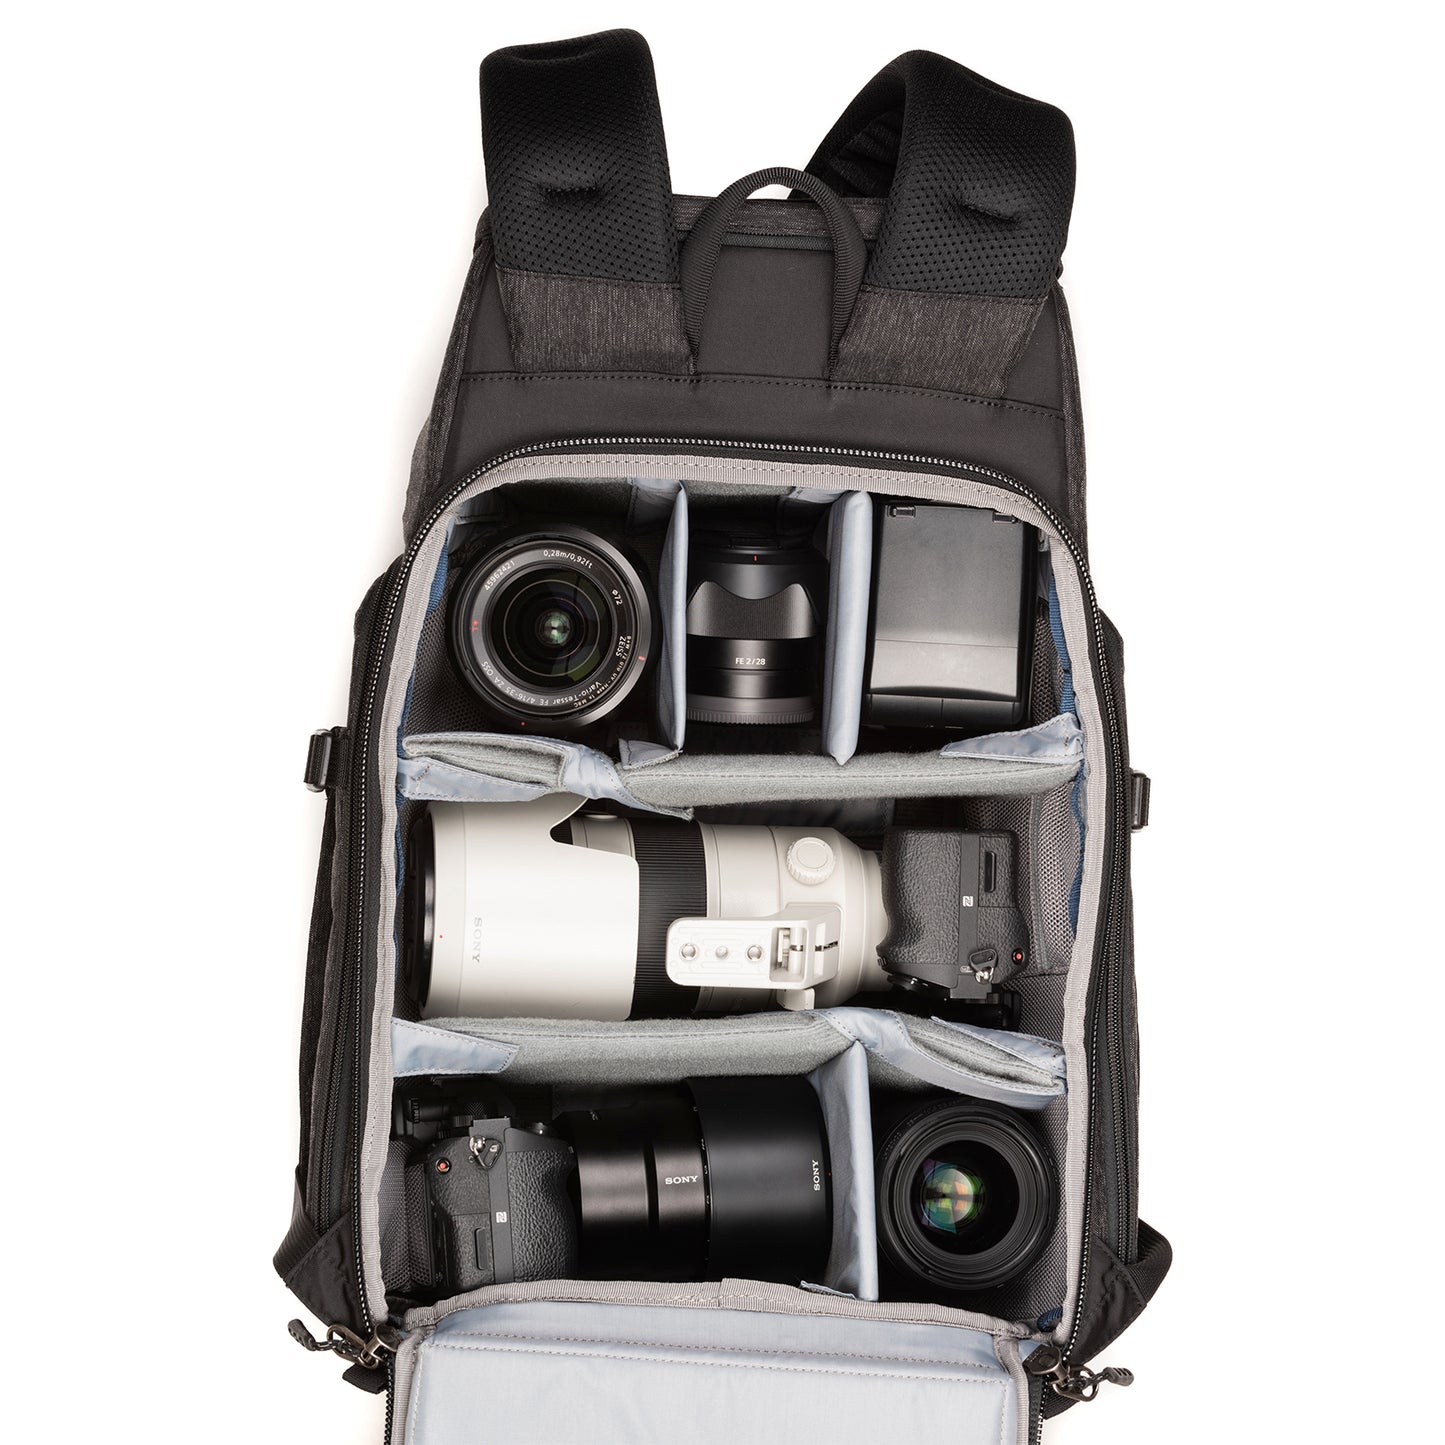 Sony a7rIII with 70–200mm f/2.8 attached, 24–70mm f/2.8, 16–35mm f/4, 90mm f/2.8 macro, HVL-F43M strobe and a 15” laptop